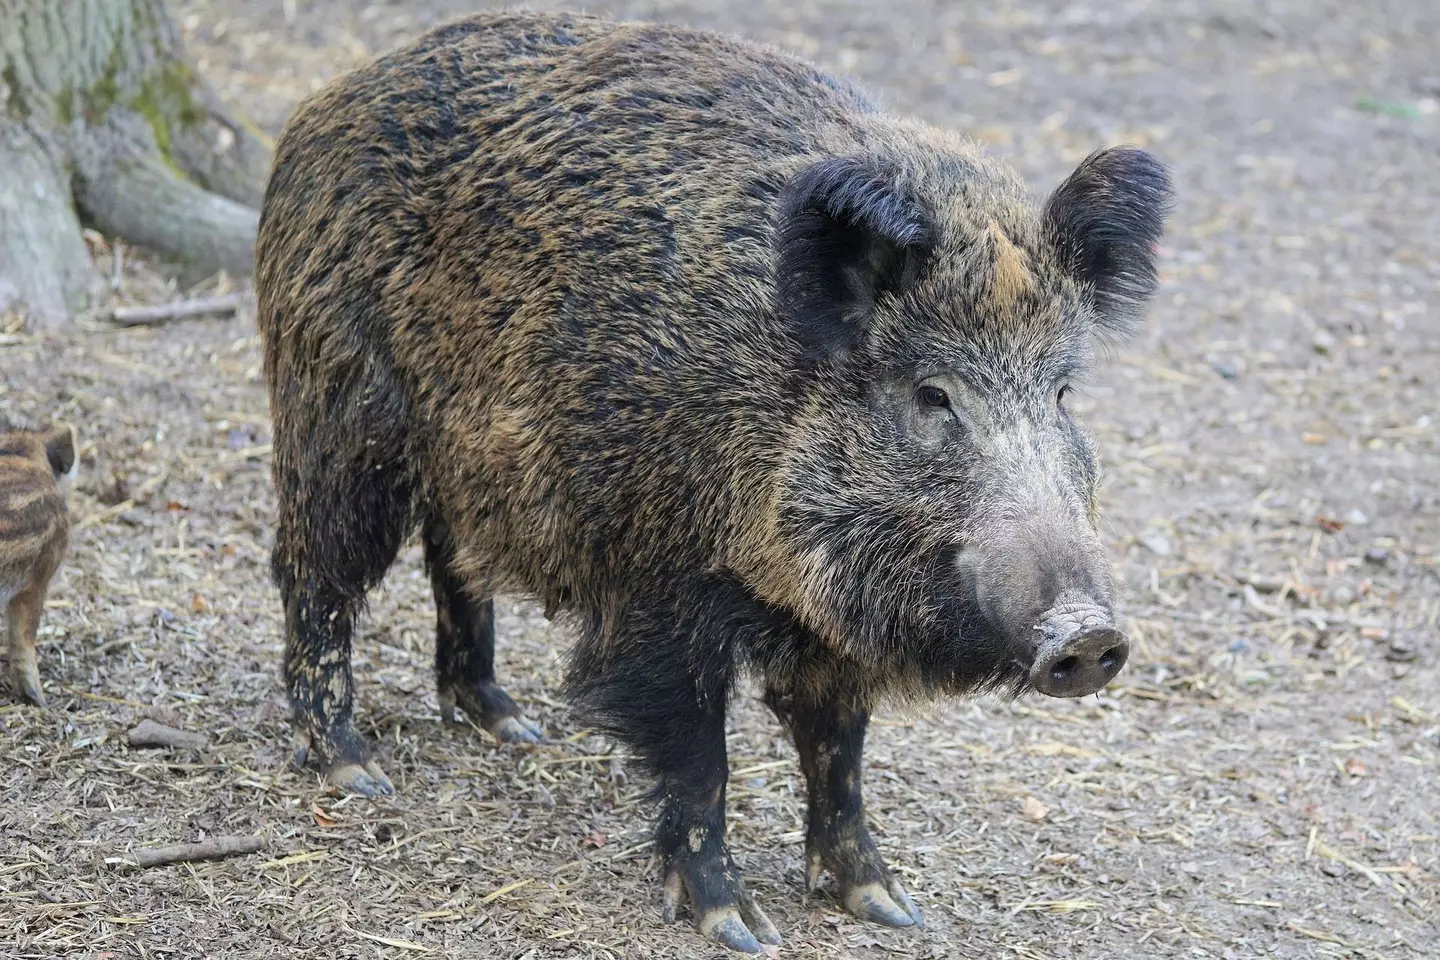 Wild boar are known to be good swimmers.